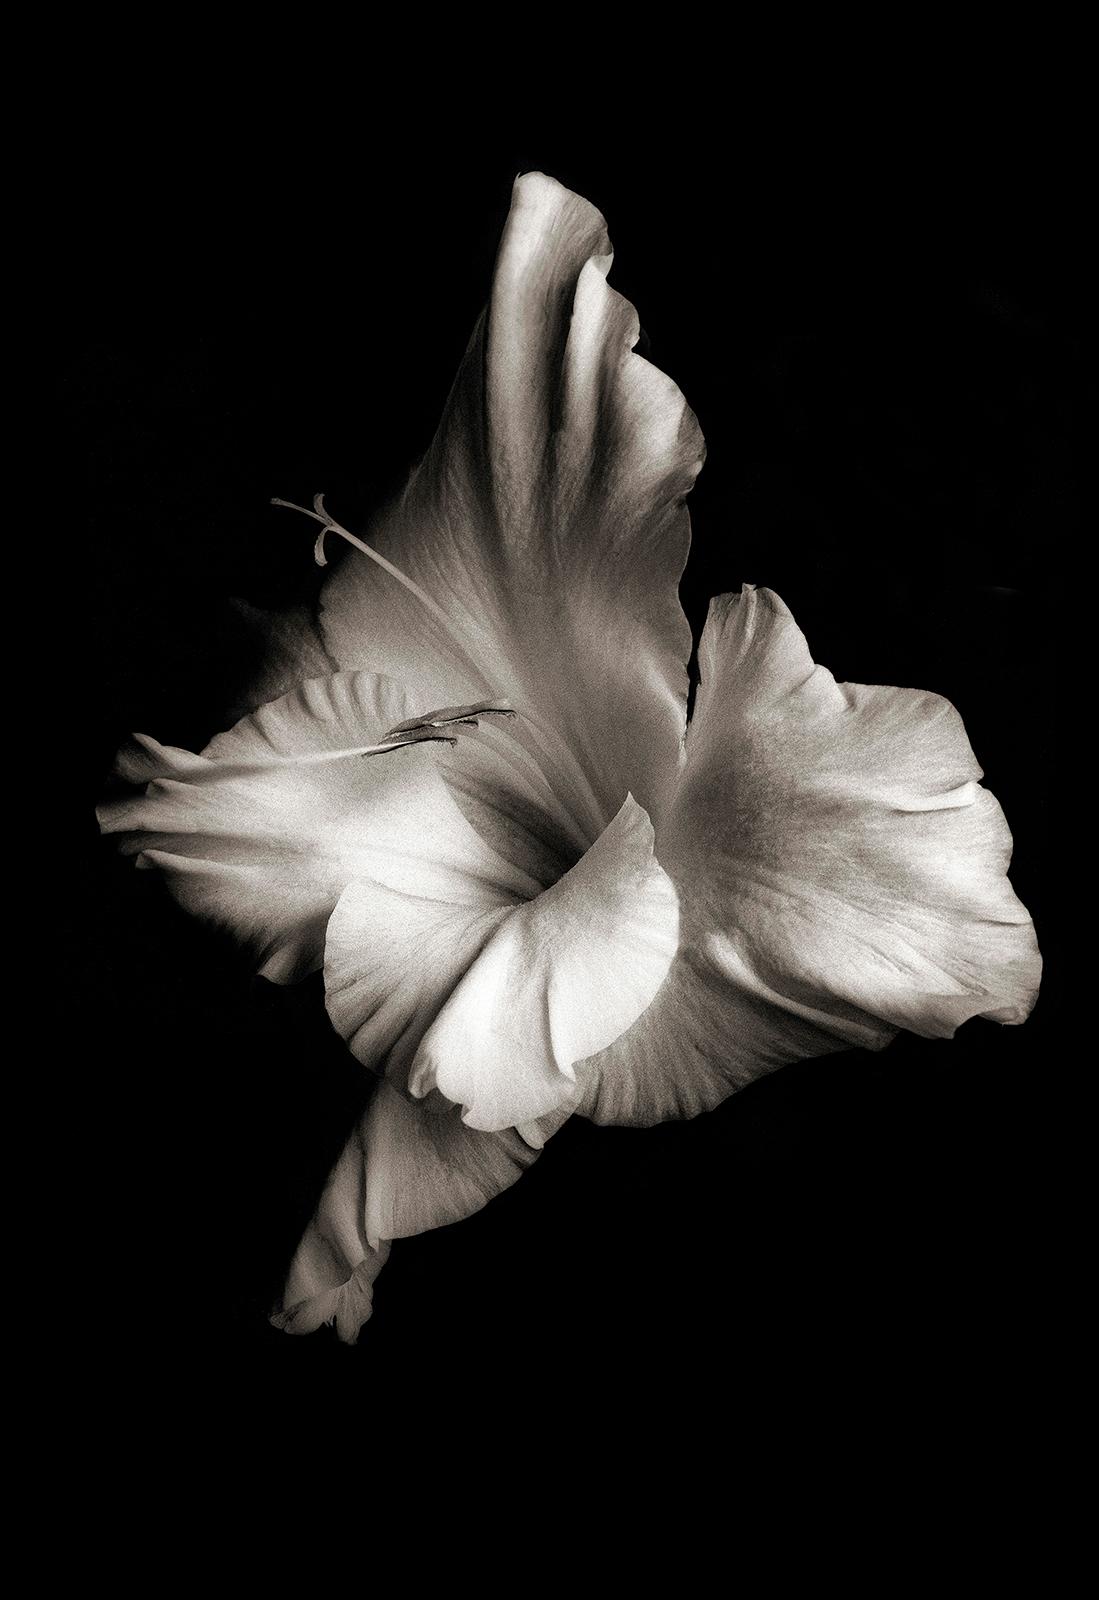 Ian Sanderson Black and White Photograph - Floral Signed limited edition still life print, Oversized close-up - FlowerHead